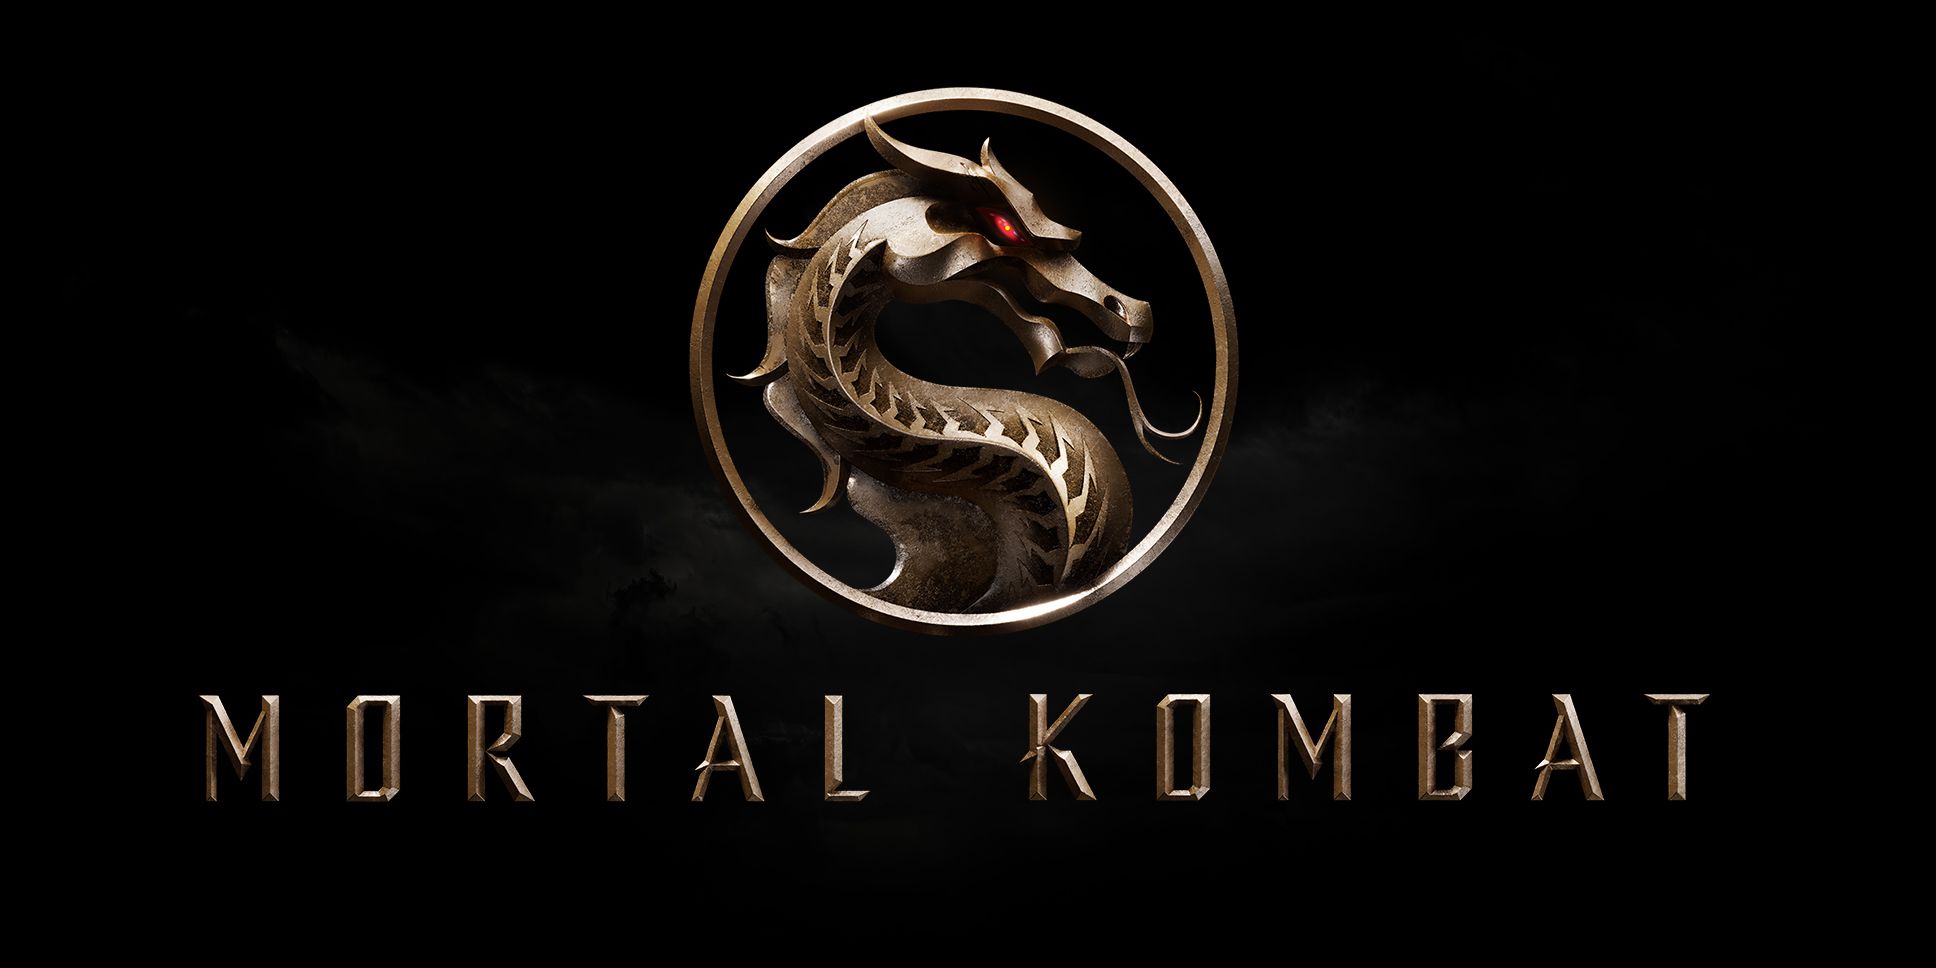 The poster for the Mortal Kombat 2021 movie.